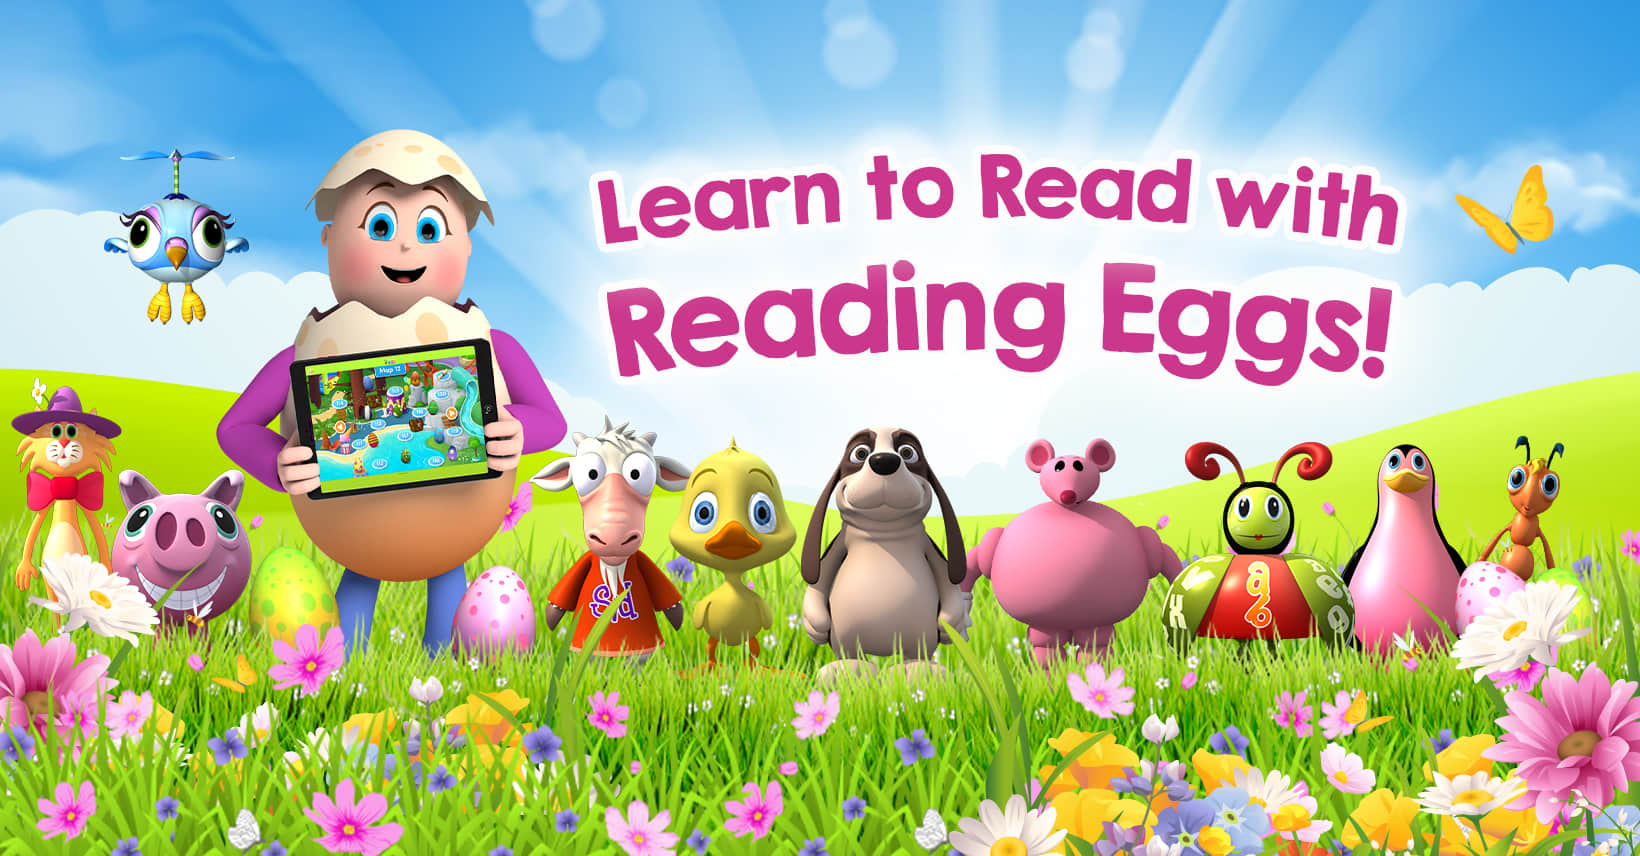 Learn to read with reading eggs!